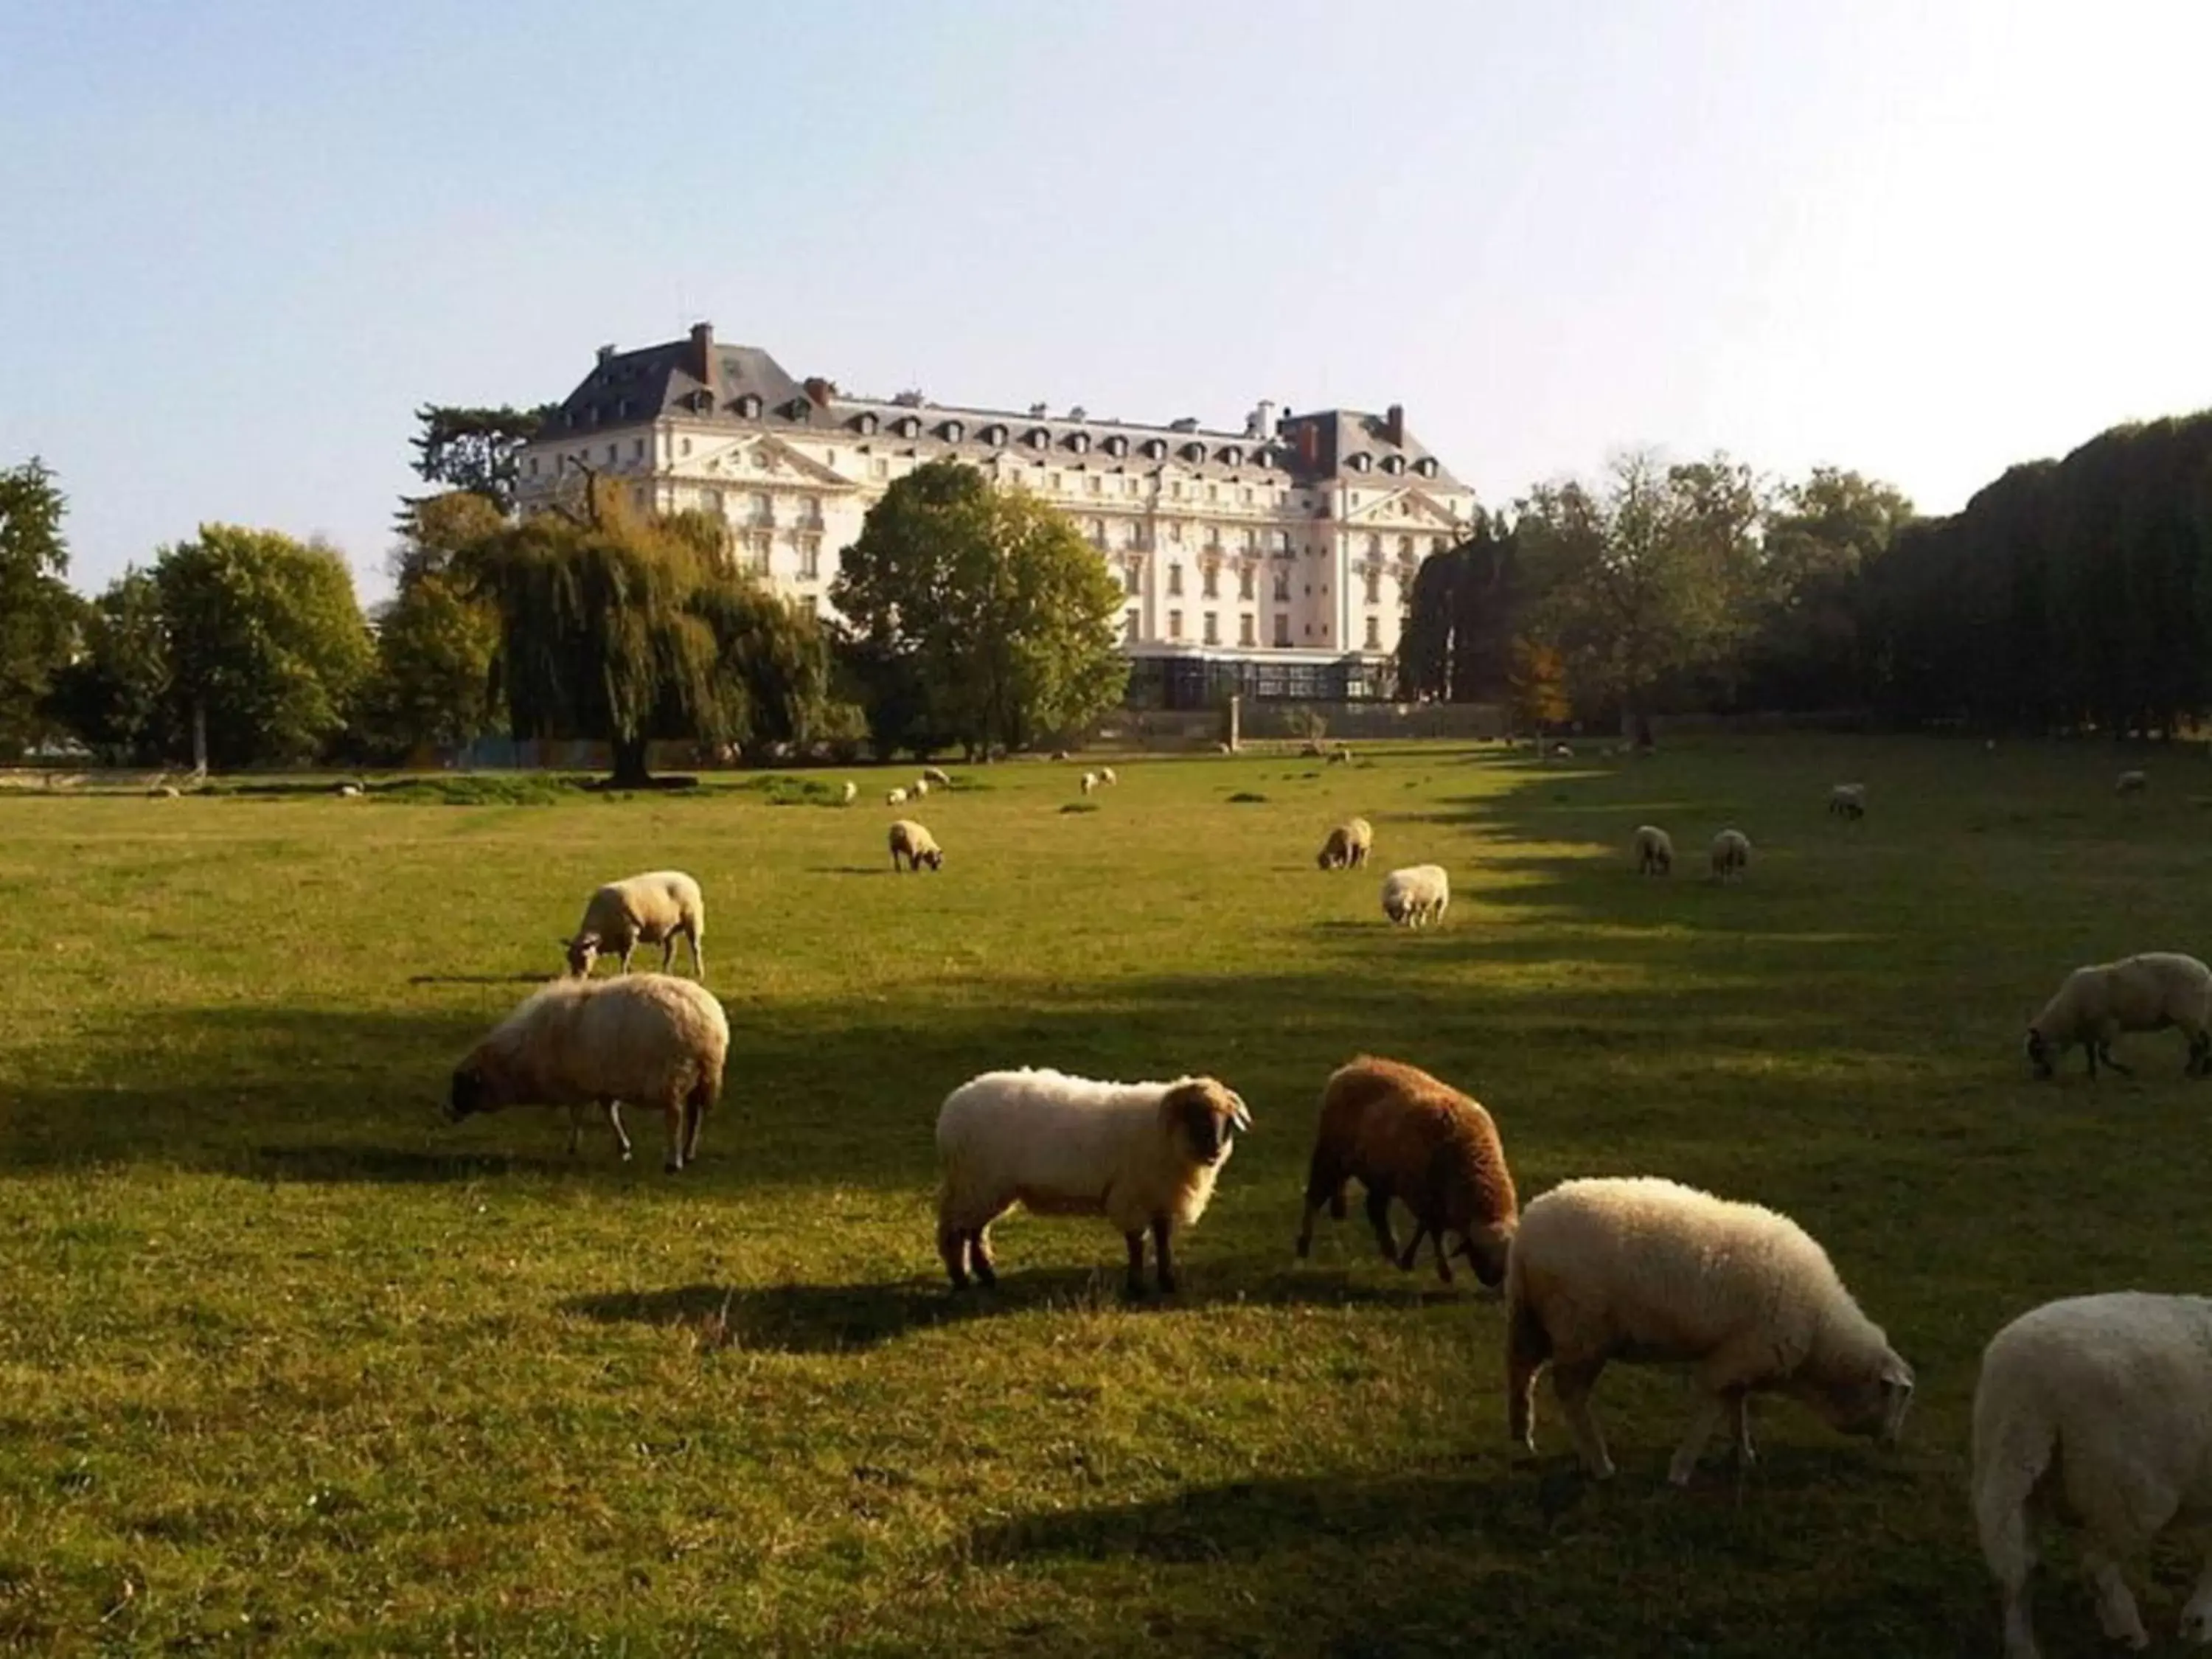 Property building, Other Animals in Waldorf Astoria Versailles - Trianon Palace